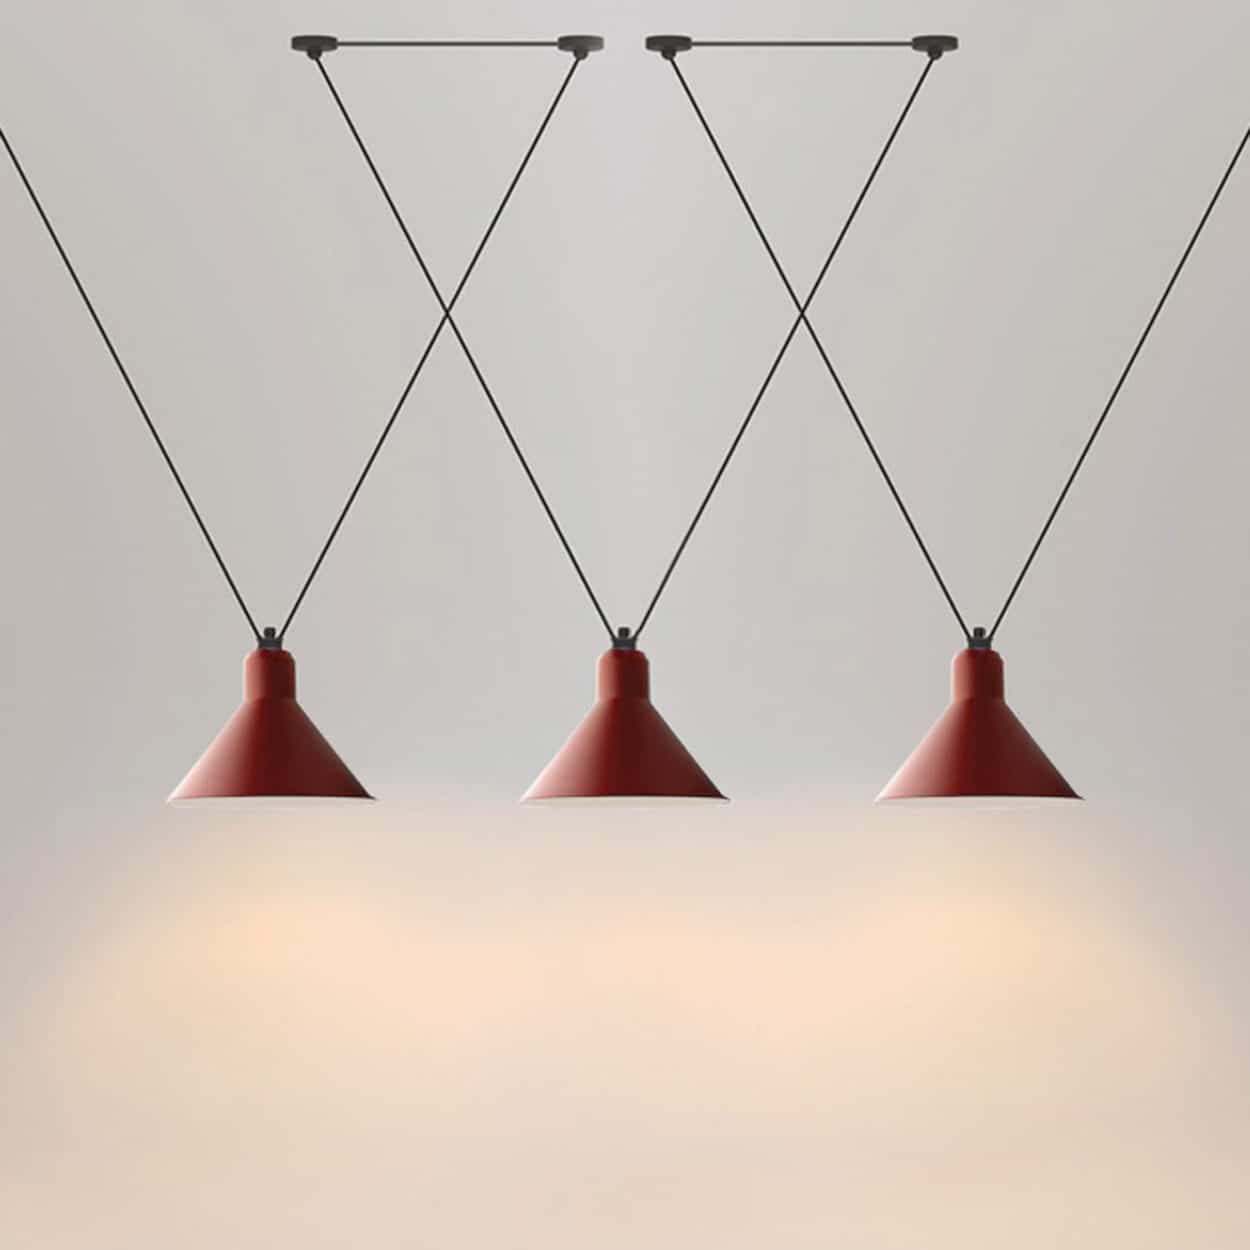 Foccasi V-Wires Funnel Shades Pendant Lamp